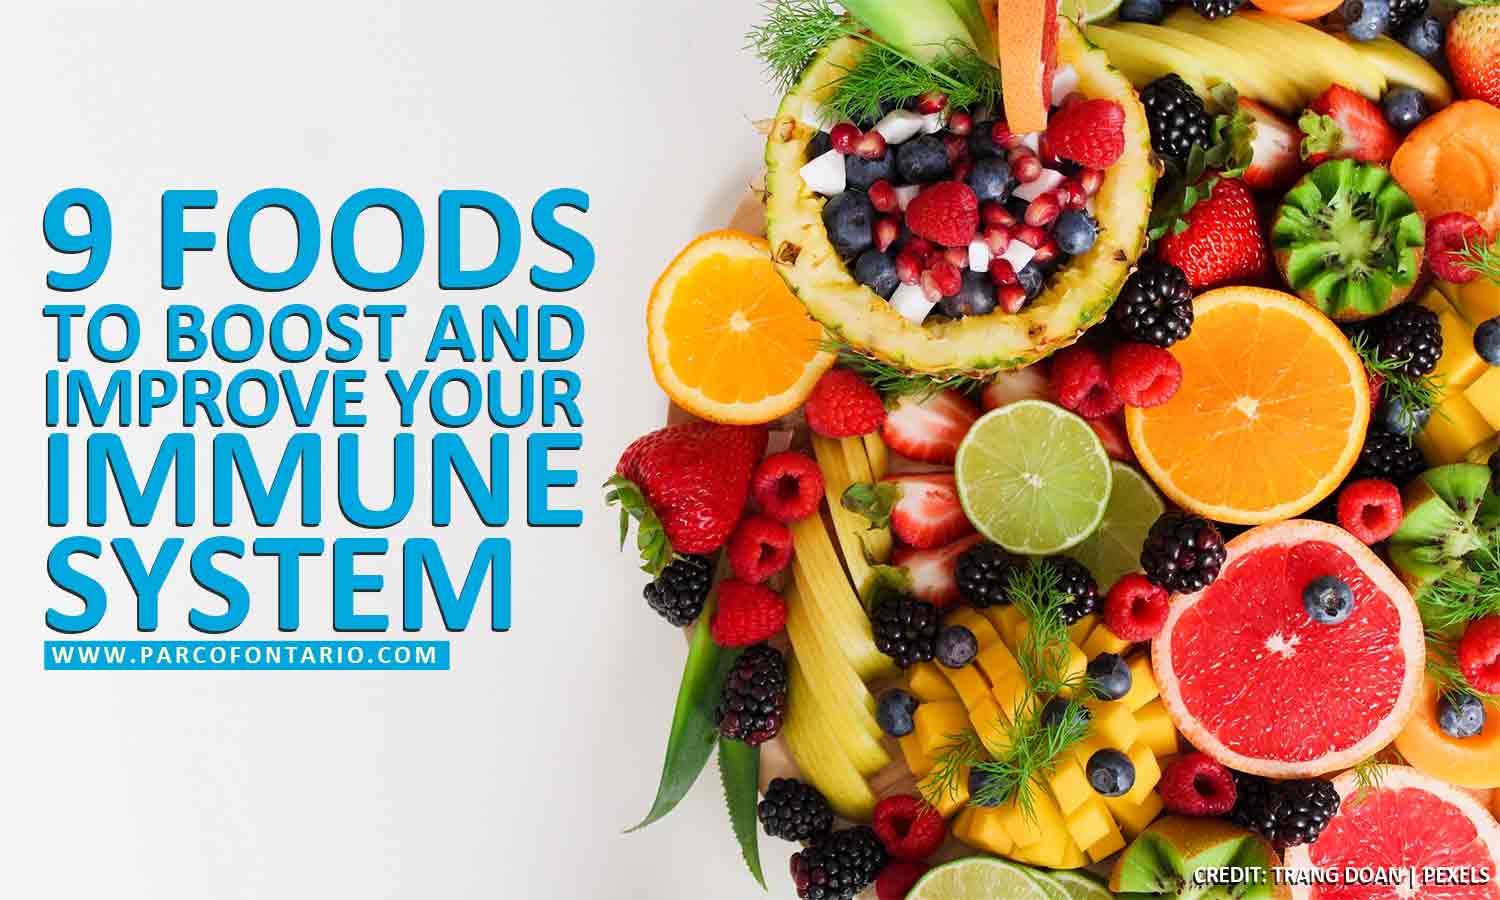 The role of nutrition in boosting the immune system